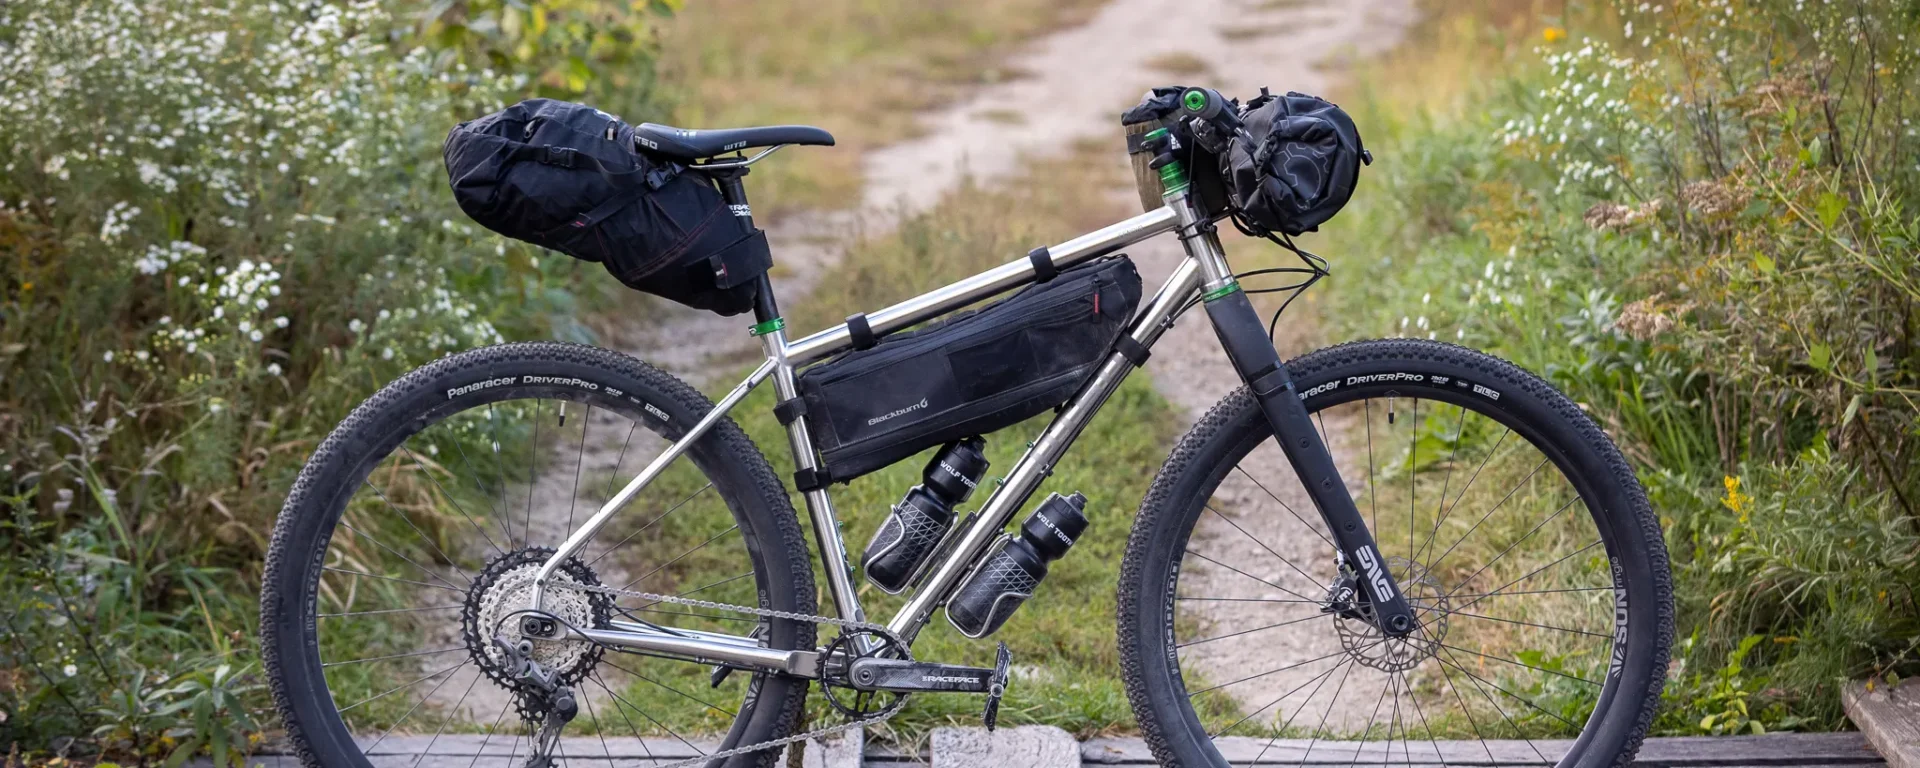 An Otso Cycles Fenrir Stainless positioned on a wooden bridge for photographs. The bike has green Wolf Tooth Components and a suite of bikepacking bags.